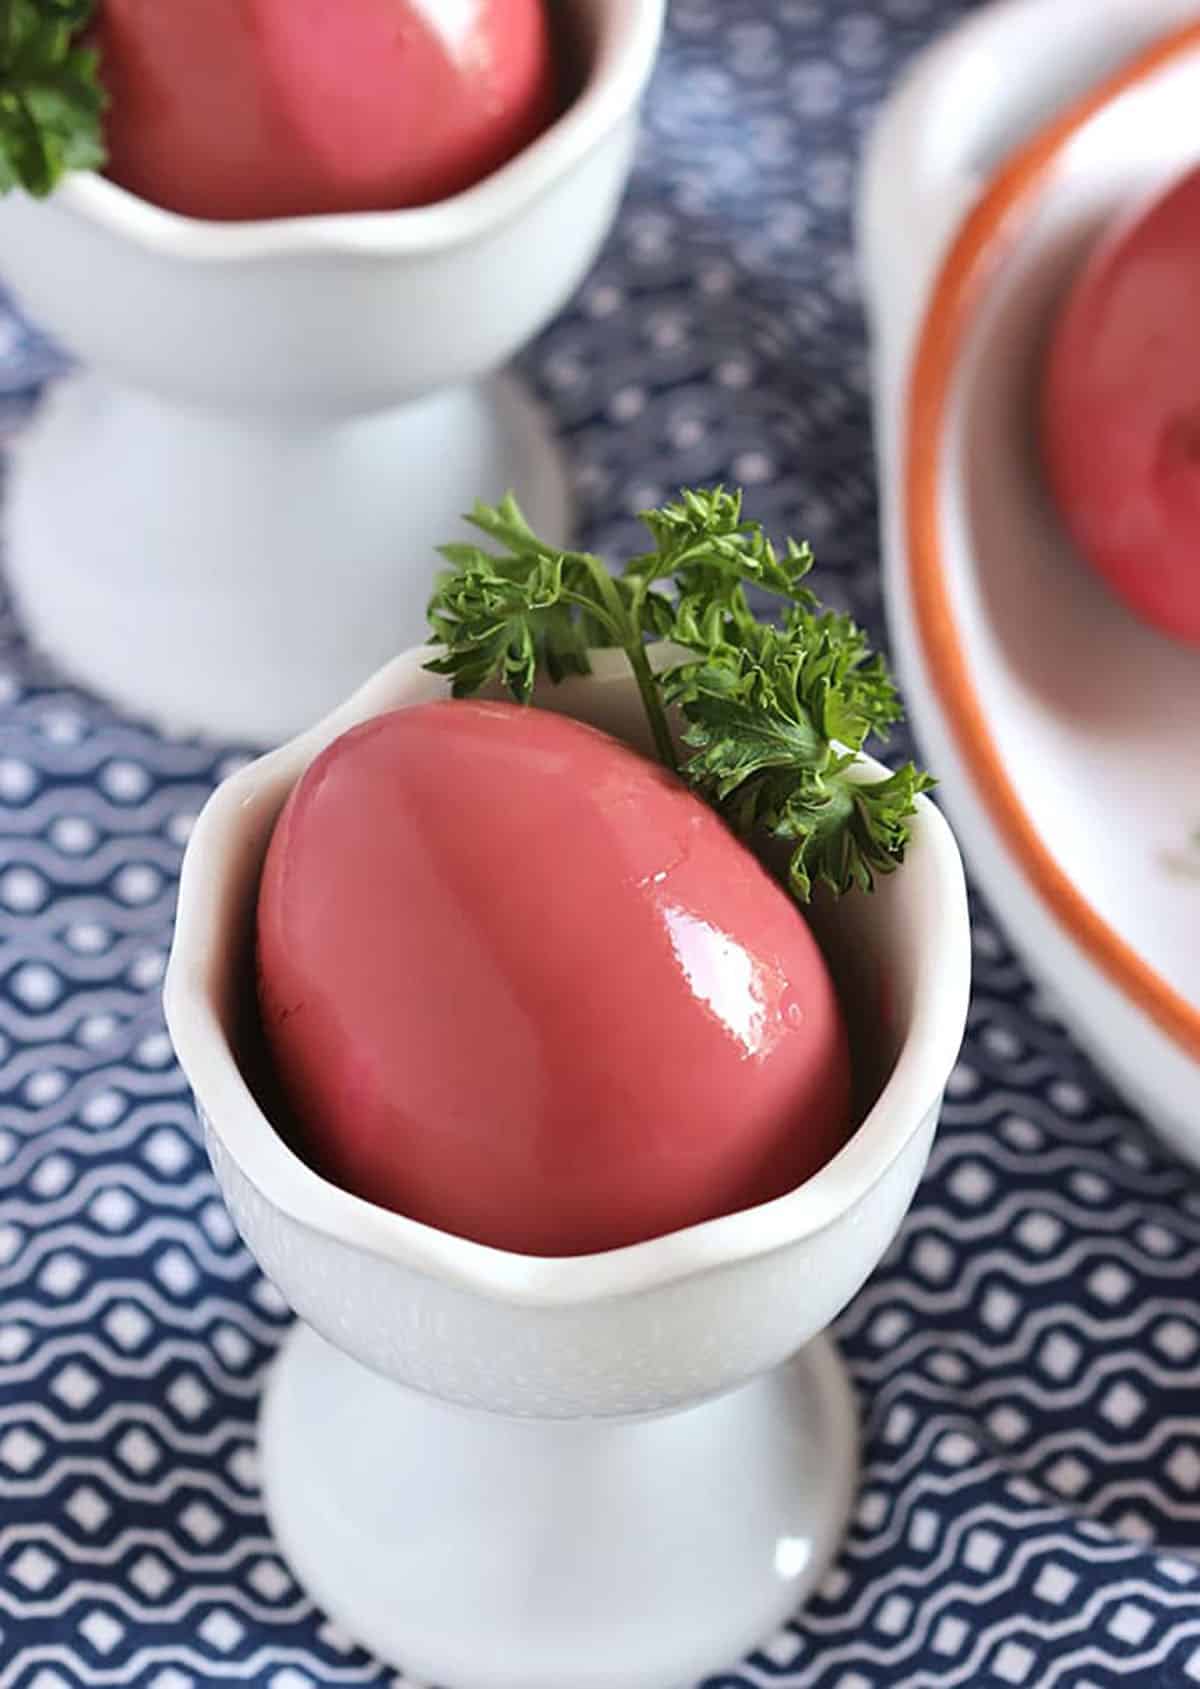 Beet pickled egg with a sprig of parsley in a white egg cup on a blue and white napkin.